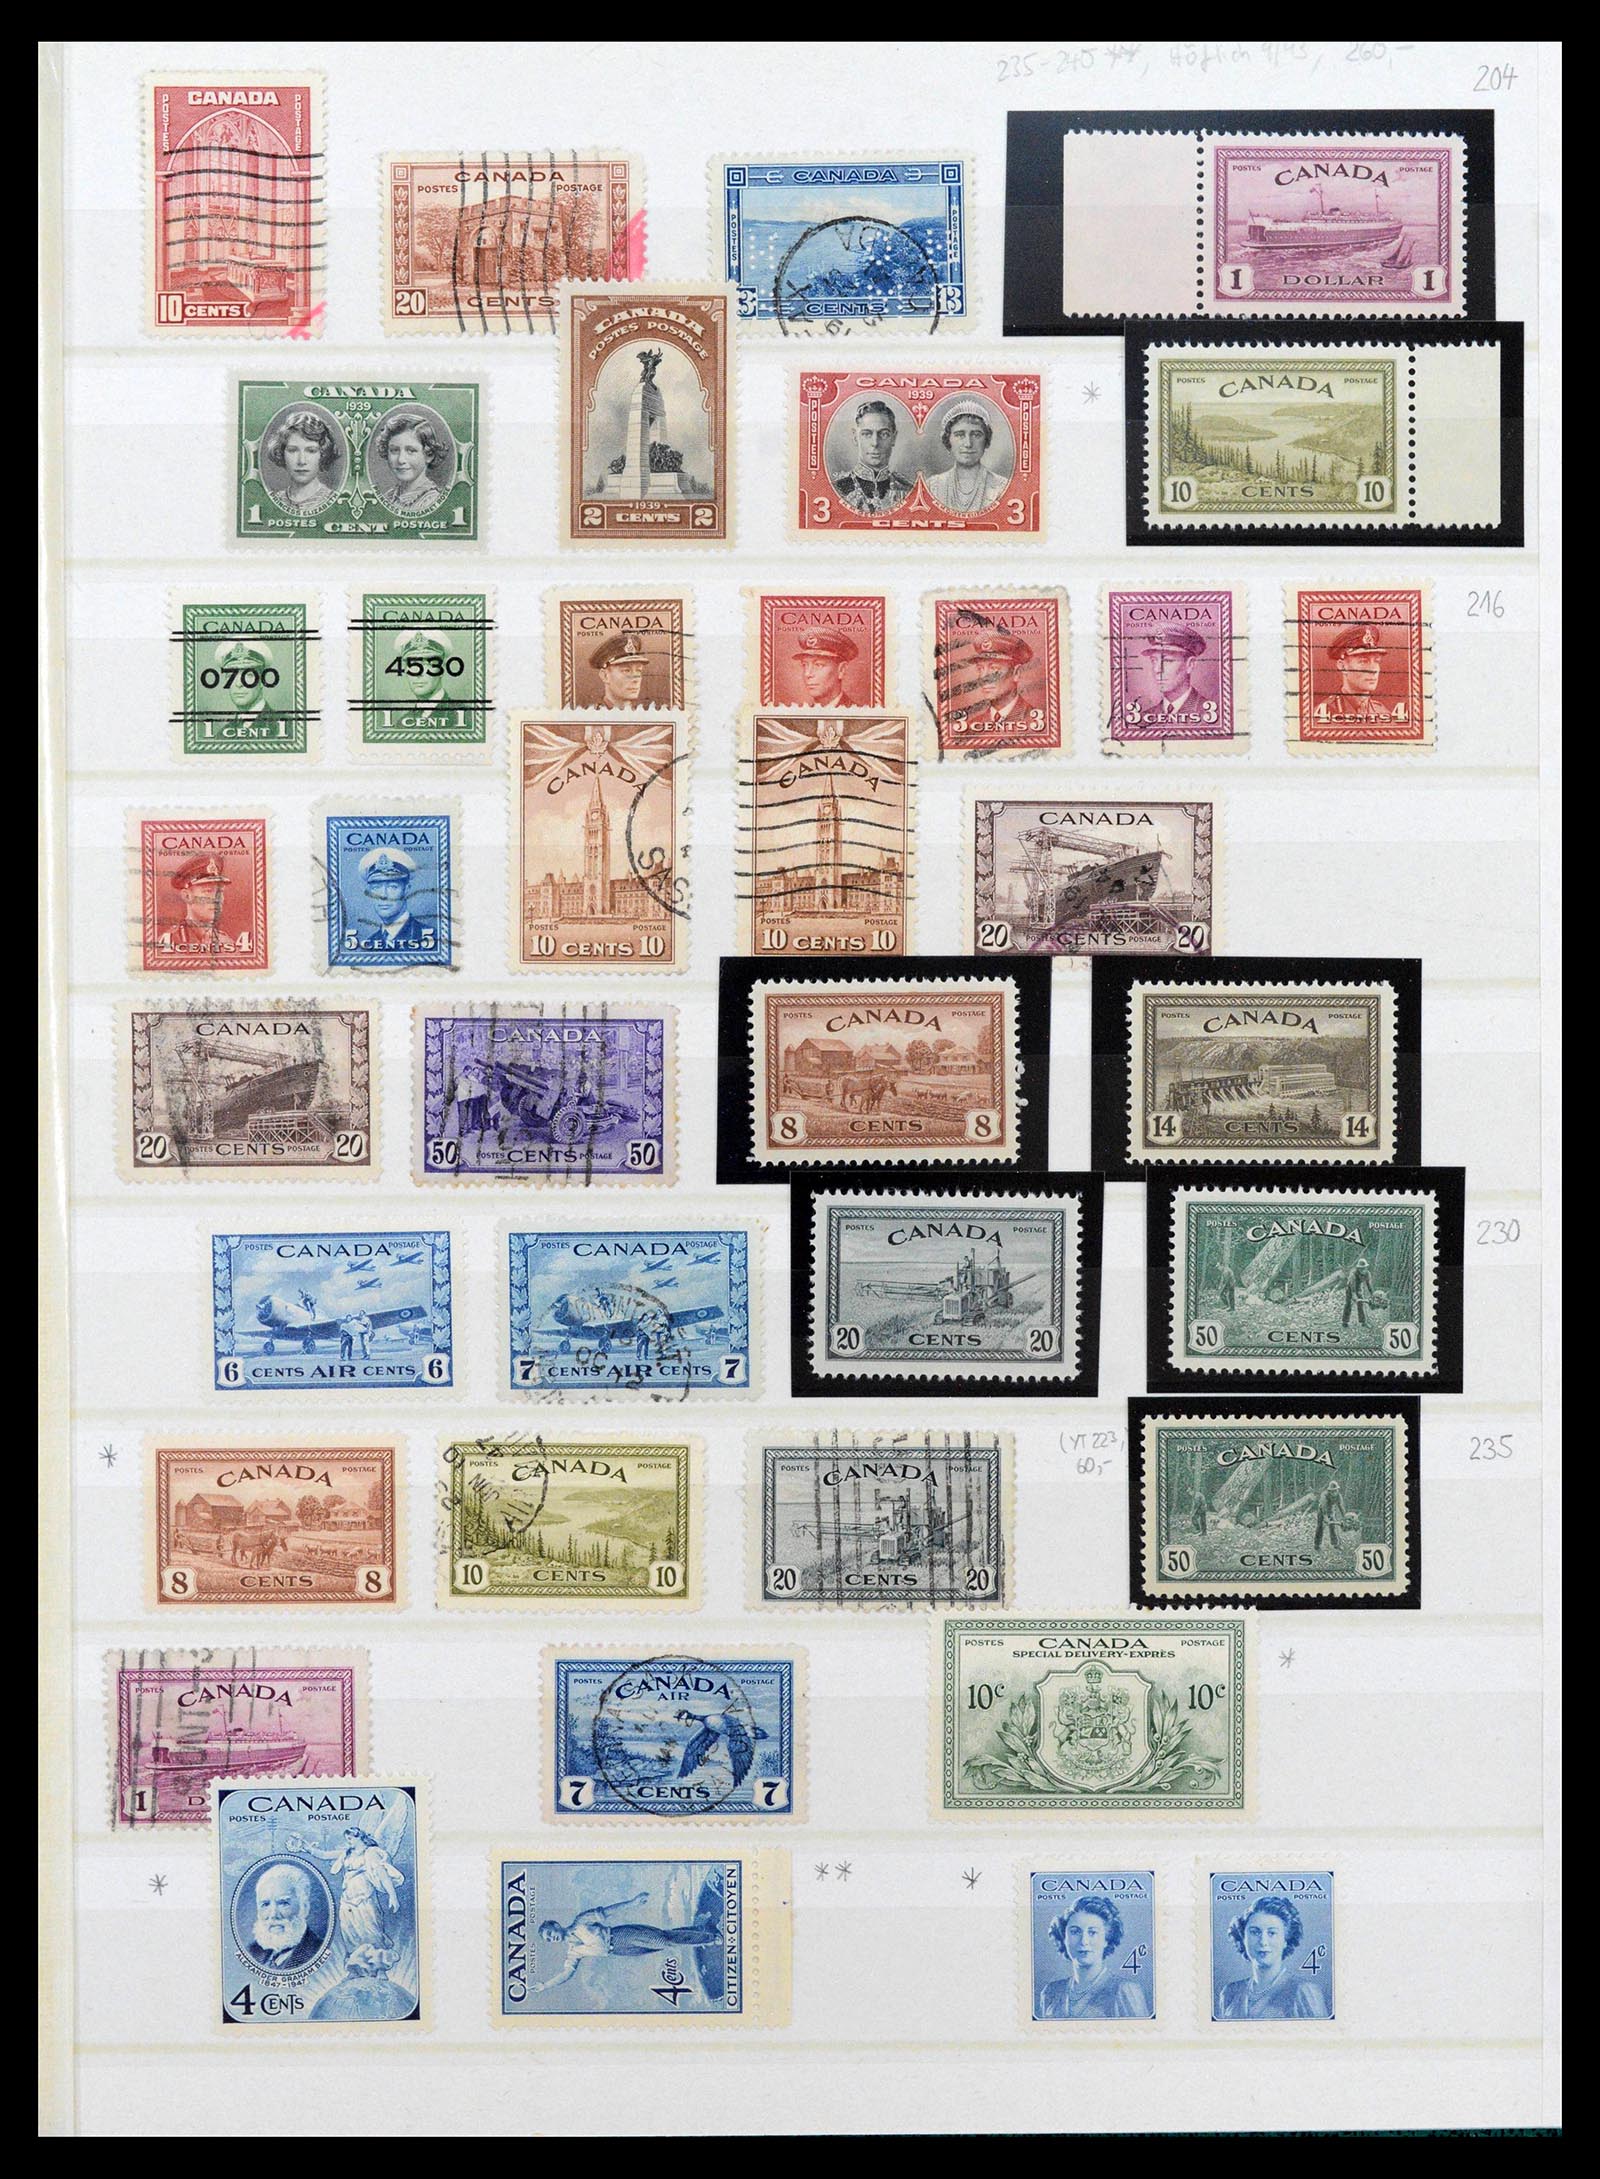 39199 0026 - Stamp collection 39199 Canada and provinces 1851-1970.